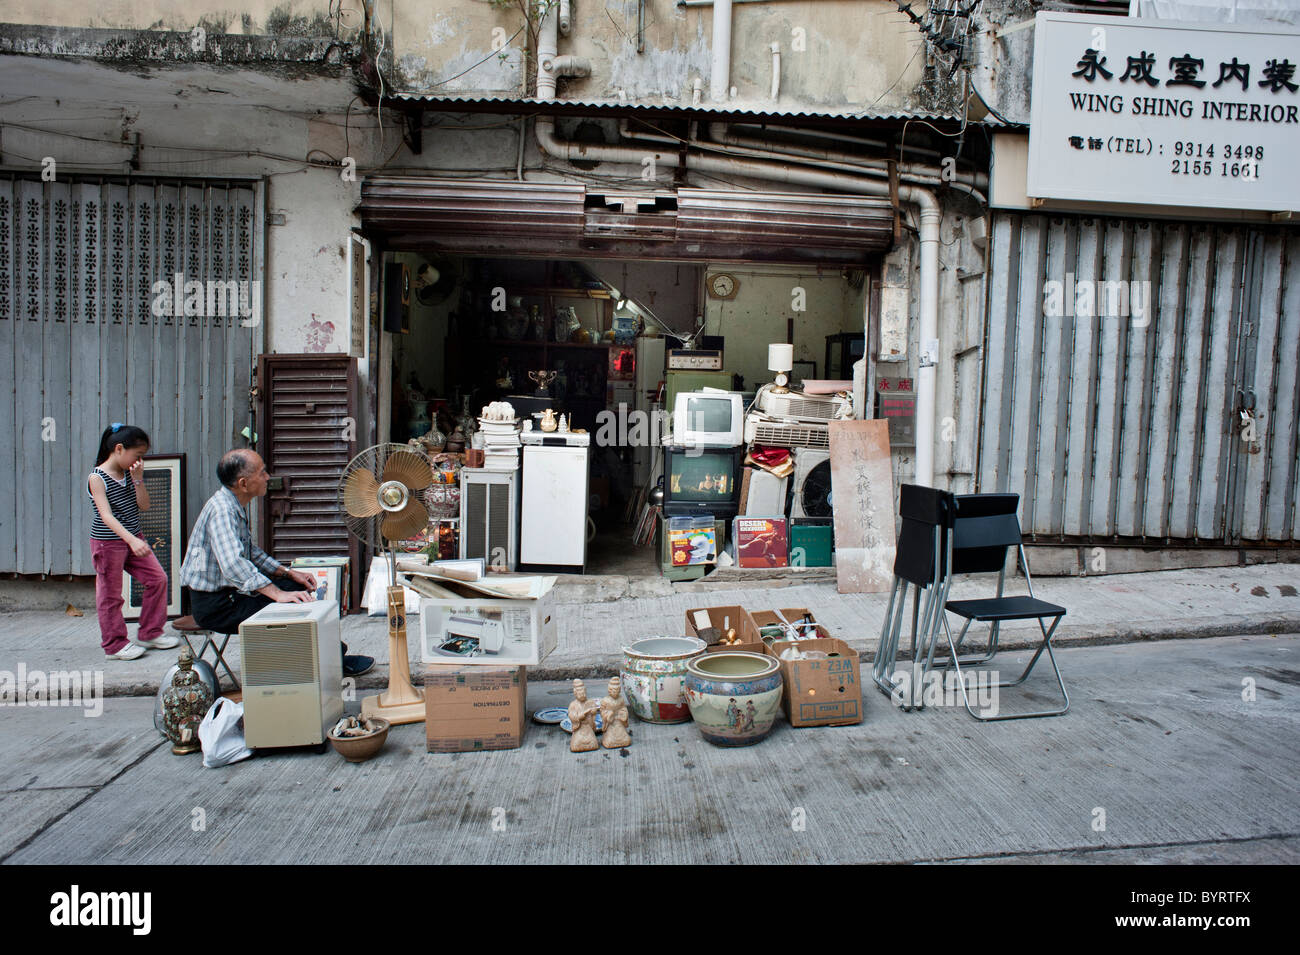 Tai Ping Shan Street street, one of the oldest Chinese neighbourhoods in Hong Kong. Now slowly gentrified. Stock Photo